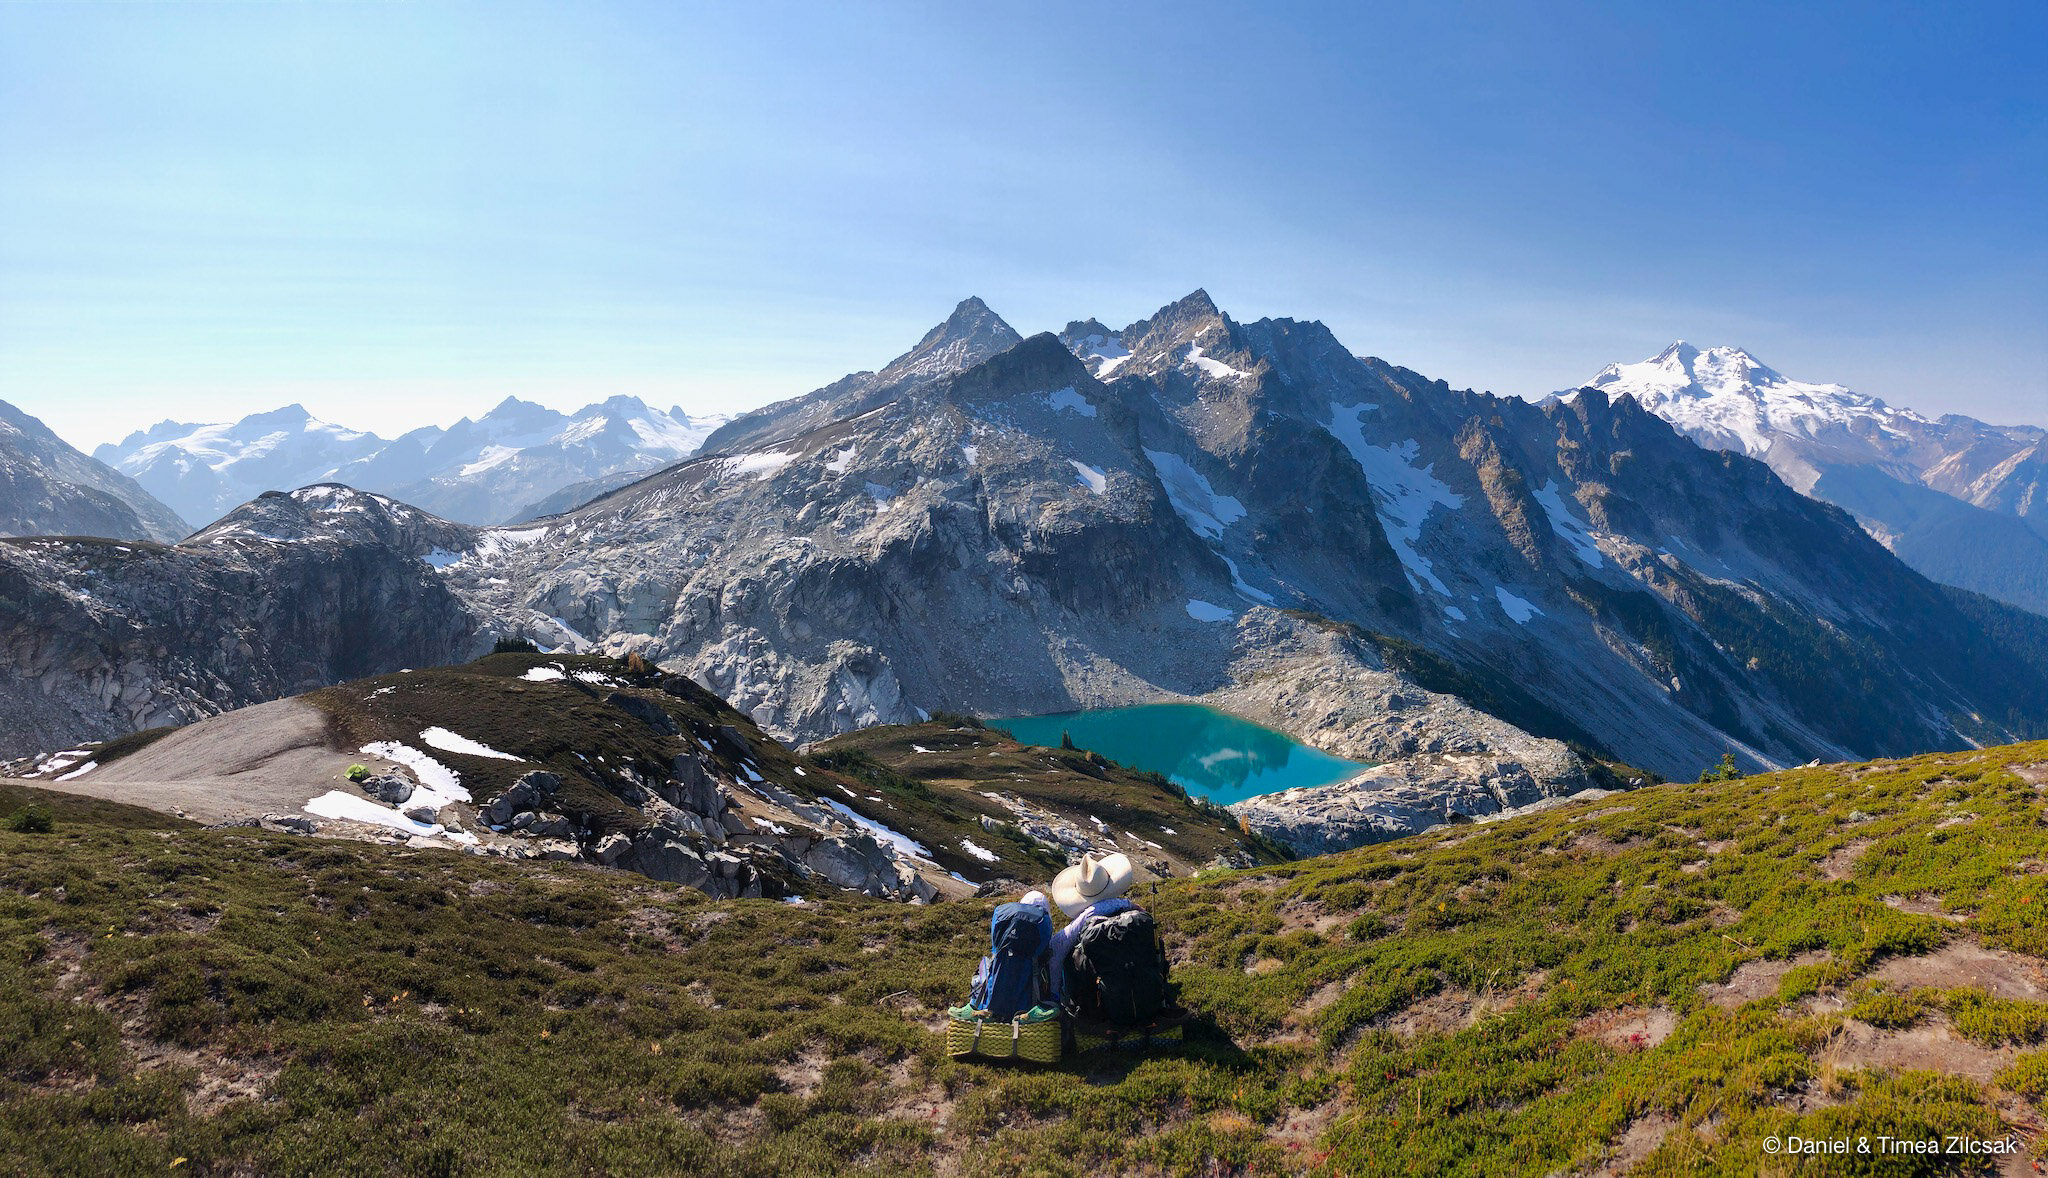 Triad Lake and Glacier Peak seen from the trail to High Pass